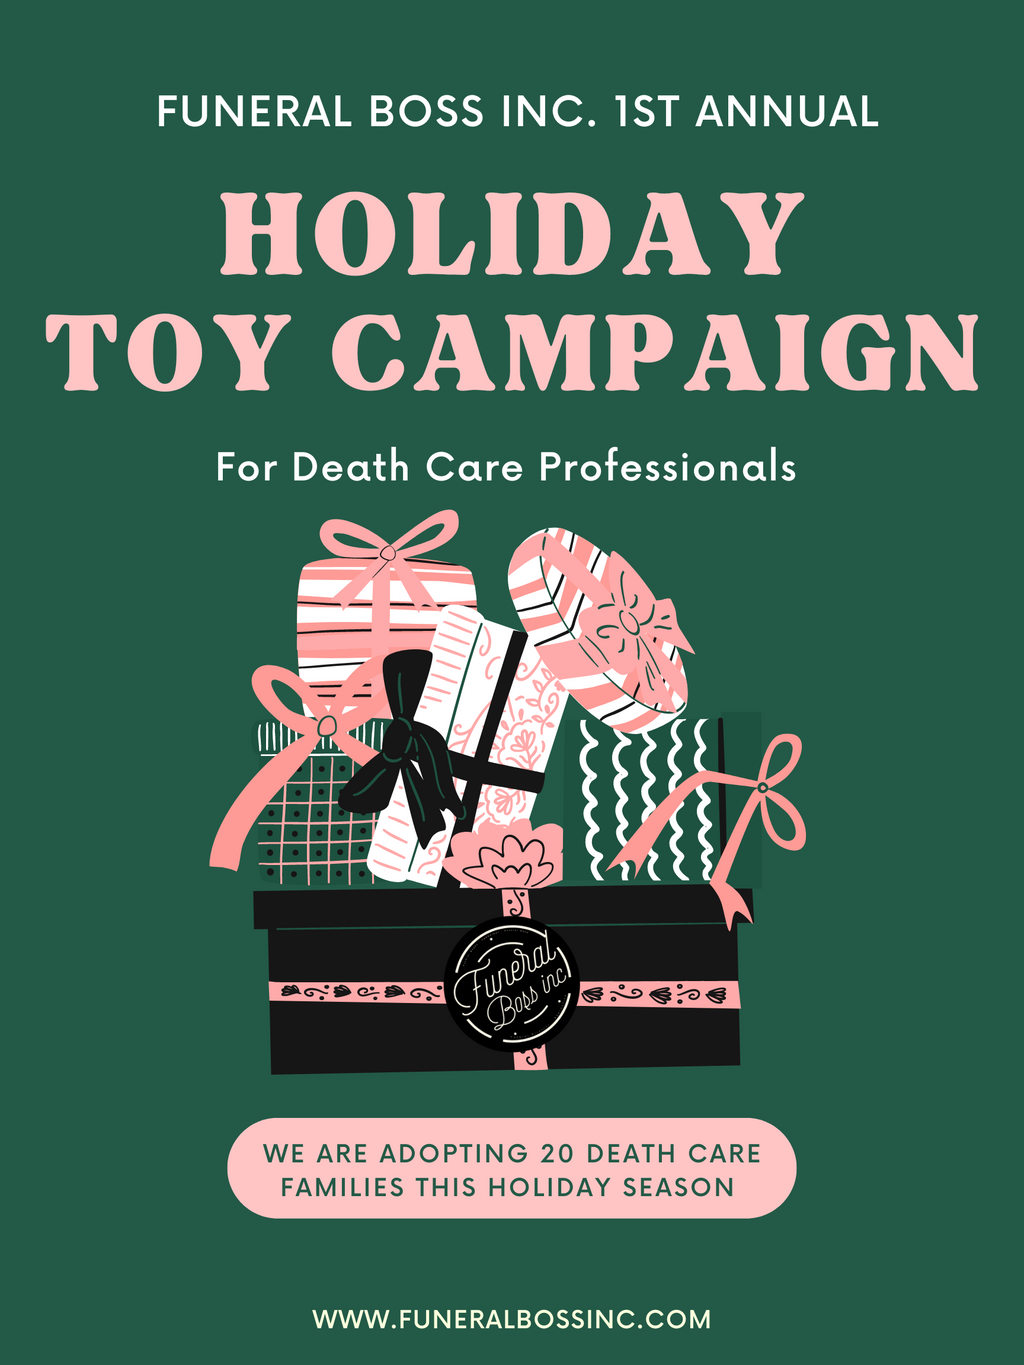 Funeral Boss Inc. First Annual Holiday Toy Campaign!